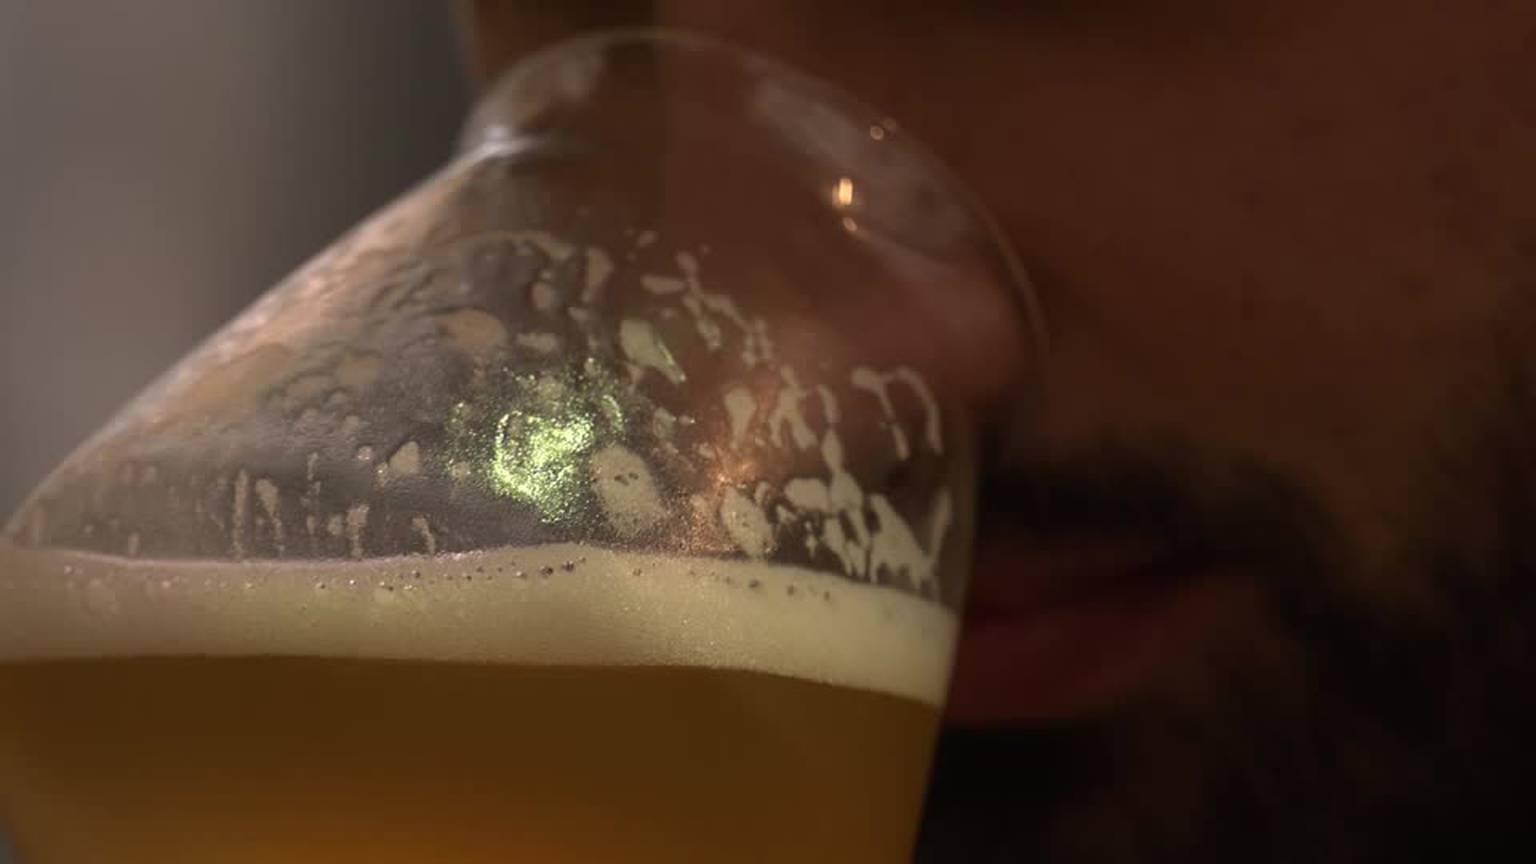 Video: This beer is made out of sewage water [Video]